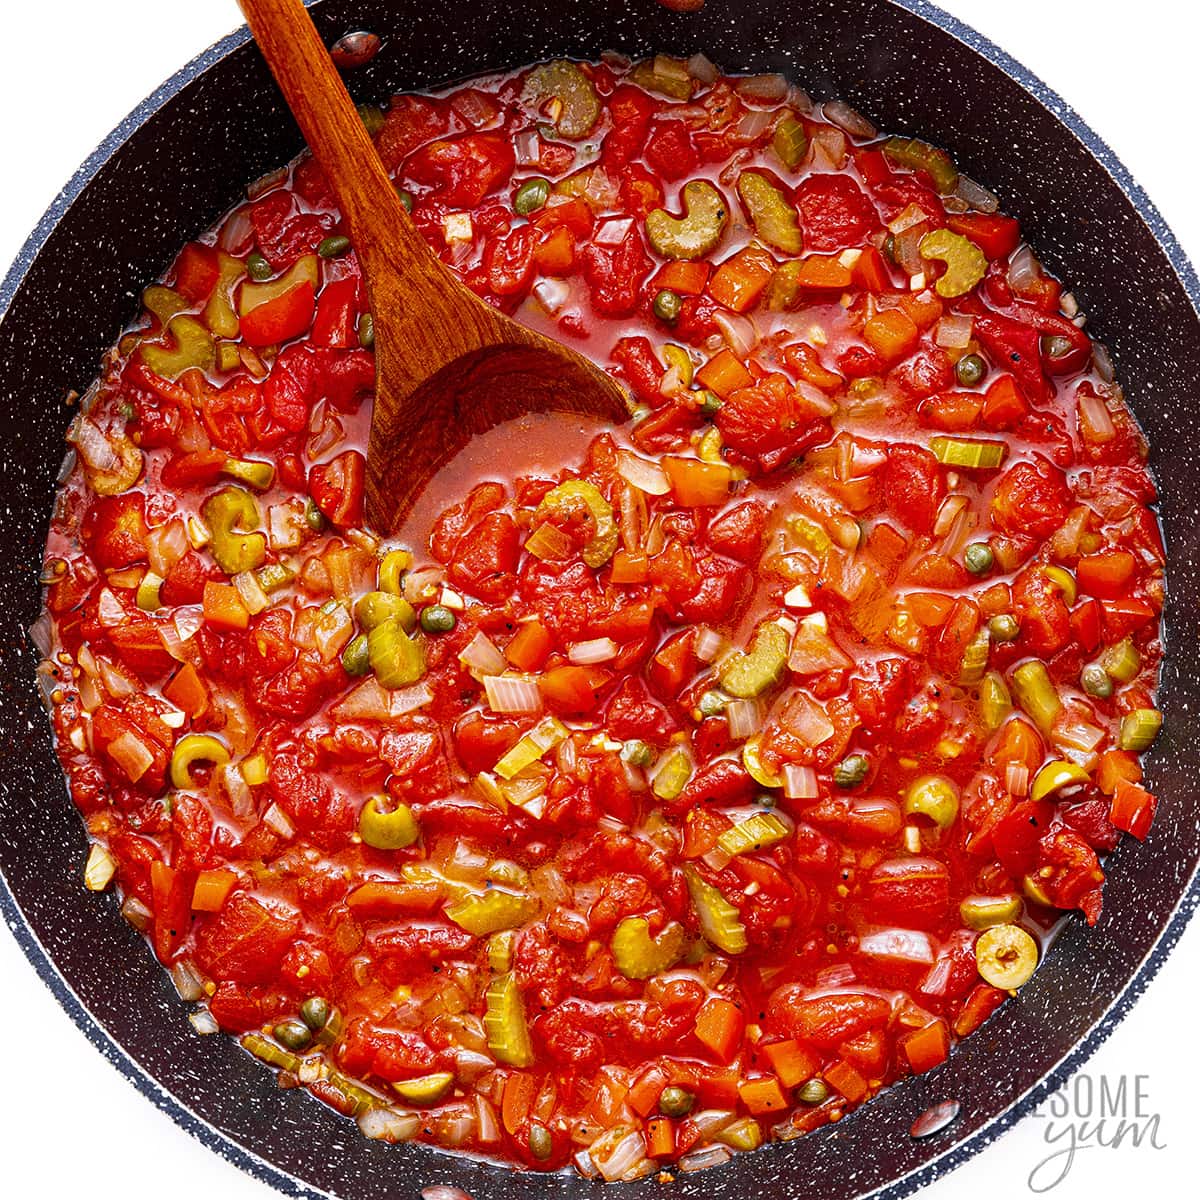 Diced tomatoes added to veggies in a skillet.